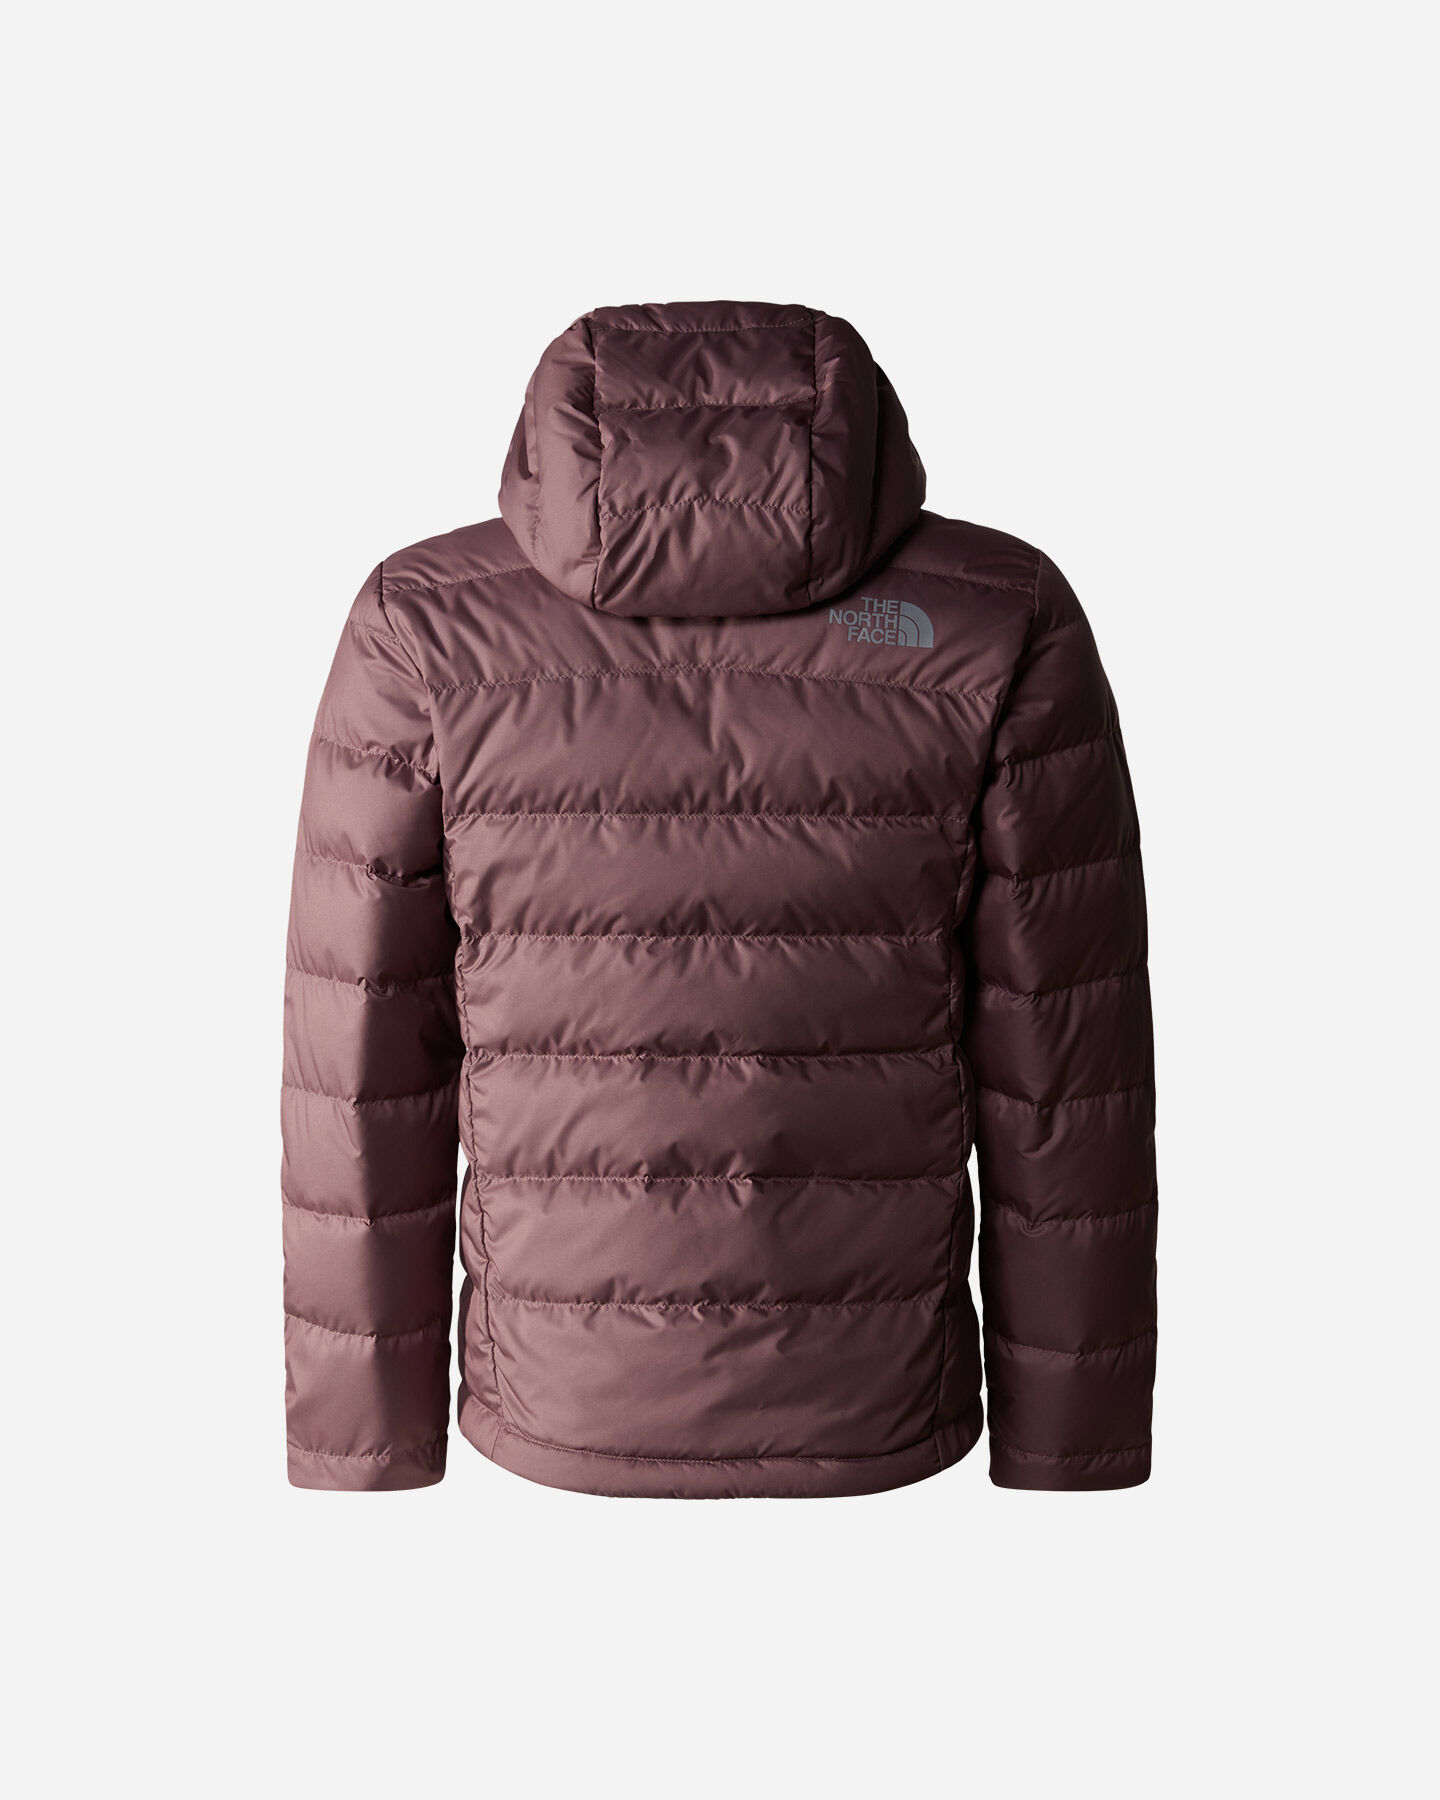  Giubbotto THE NORTH FACE NEVER STOP JR S5599274|I0V|XL scatto 1